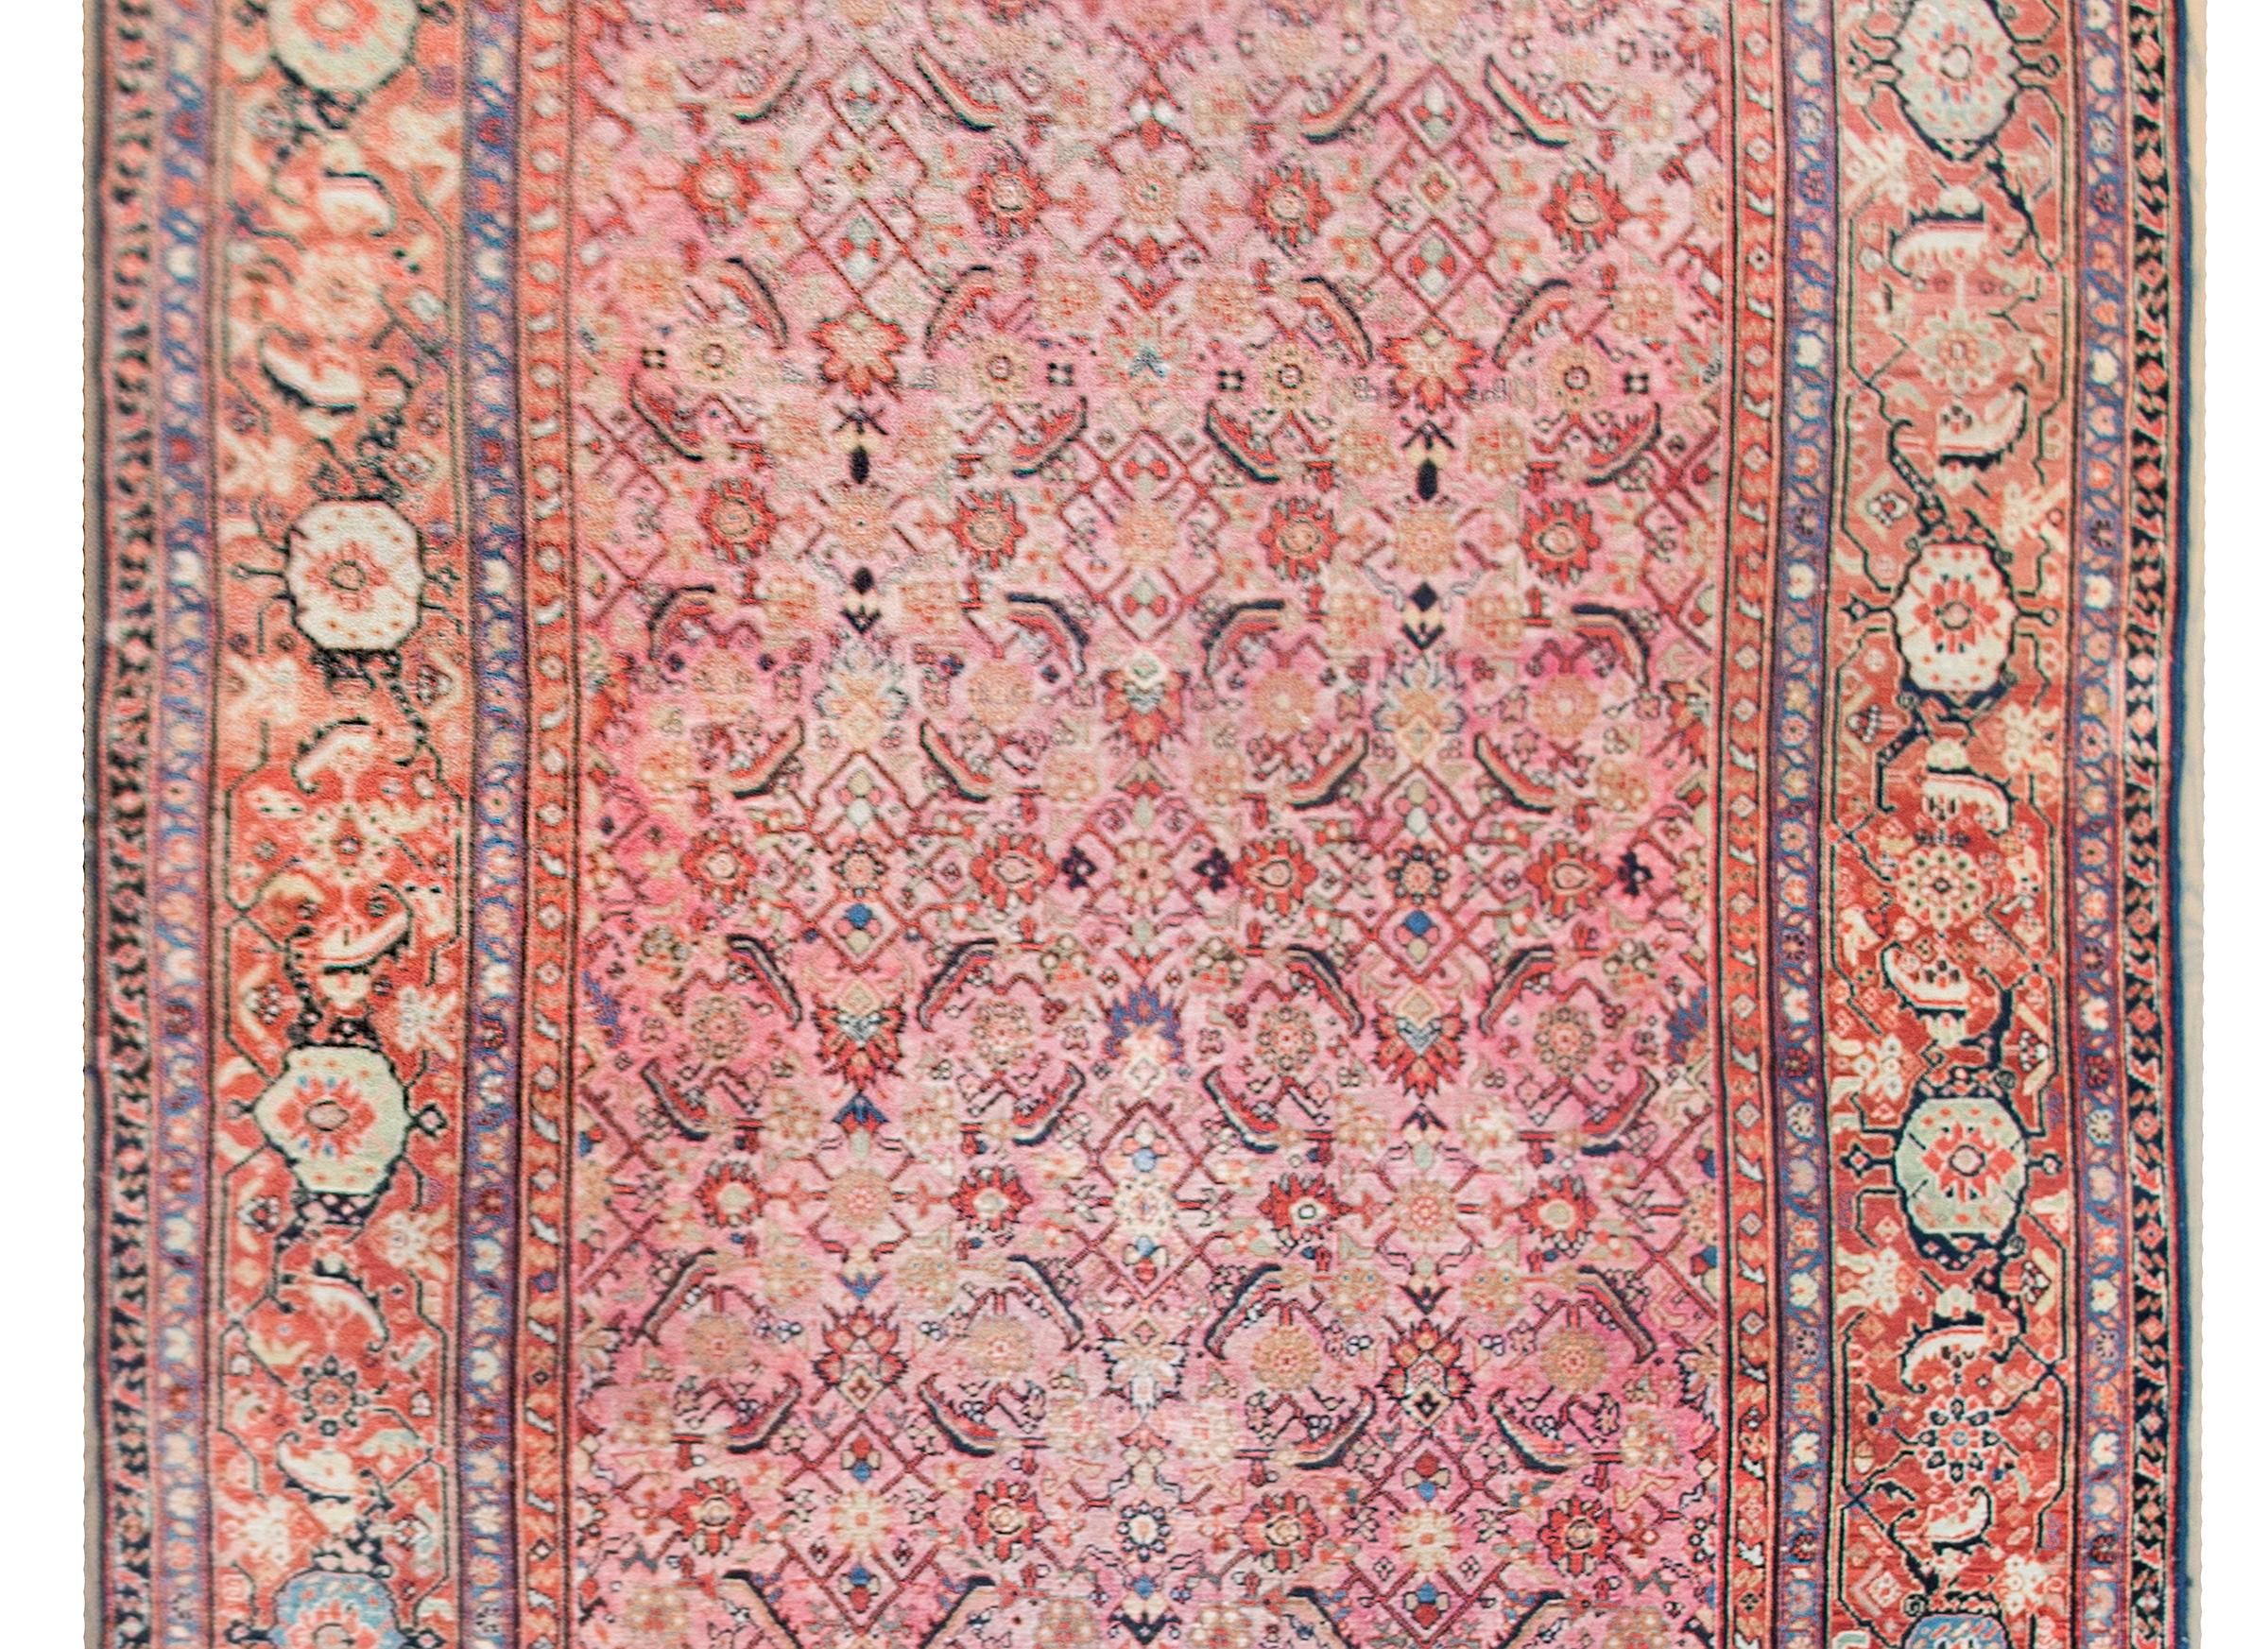 A remarkable late 19th century Persian Sarouk Farahan rug with the most incredible all-over trellis pattern with myriad paisleys, flowers, and scrolling vines, all woven in coral, pink, gold, and indigo. The border is extraordinary with large-scale